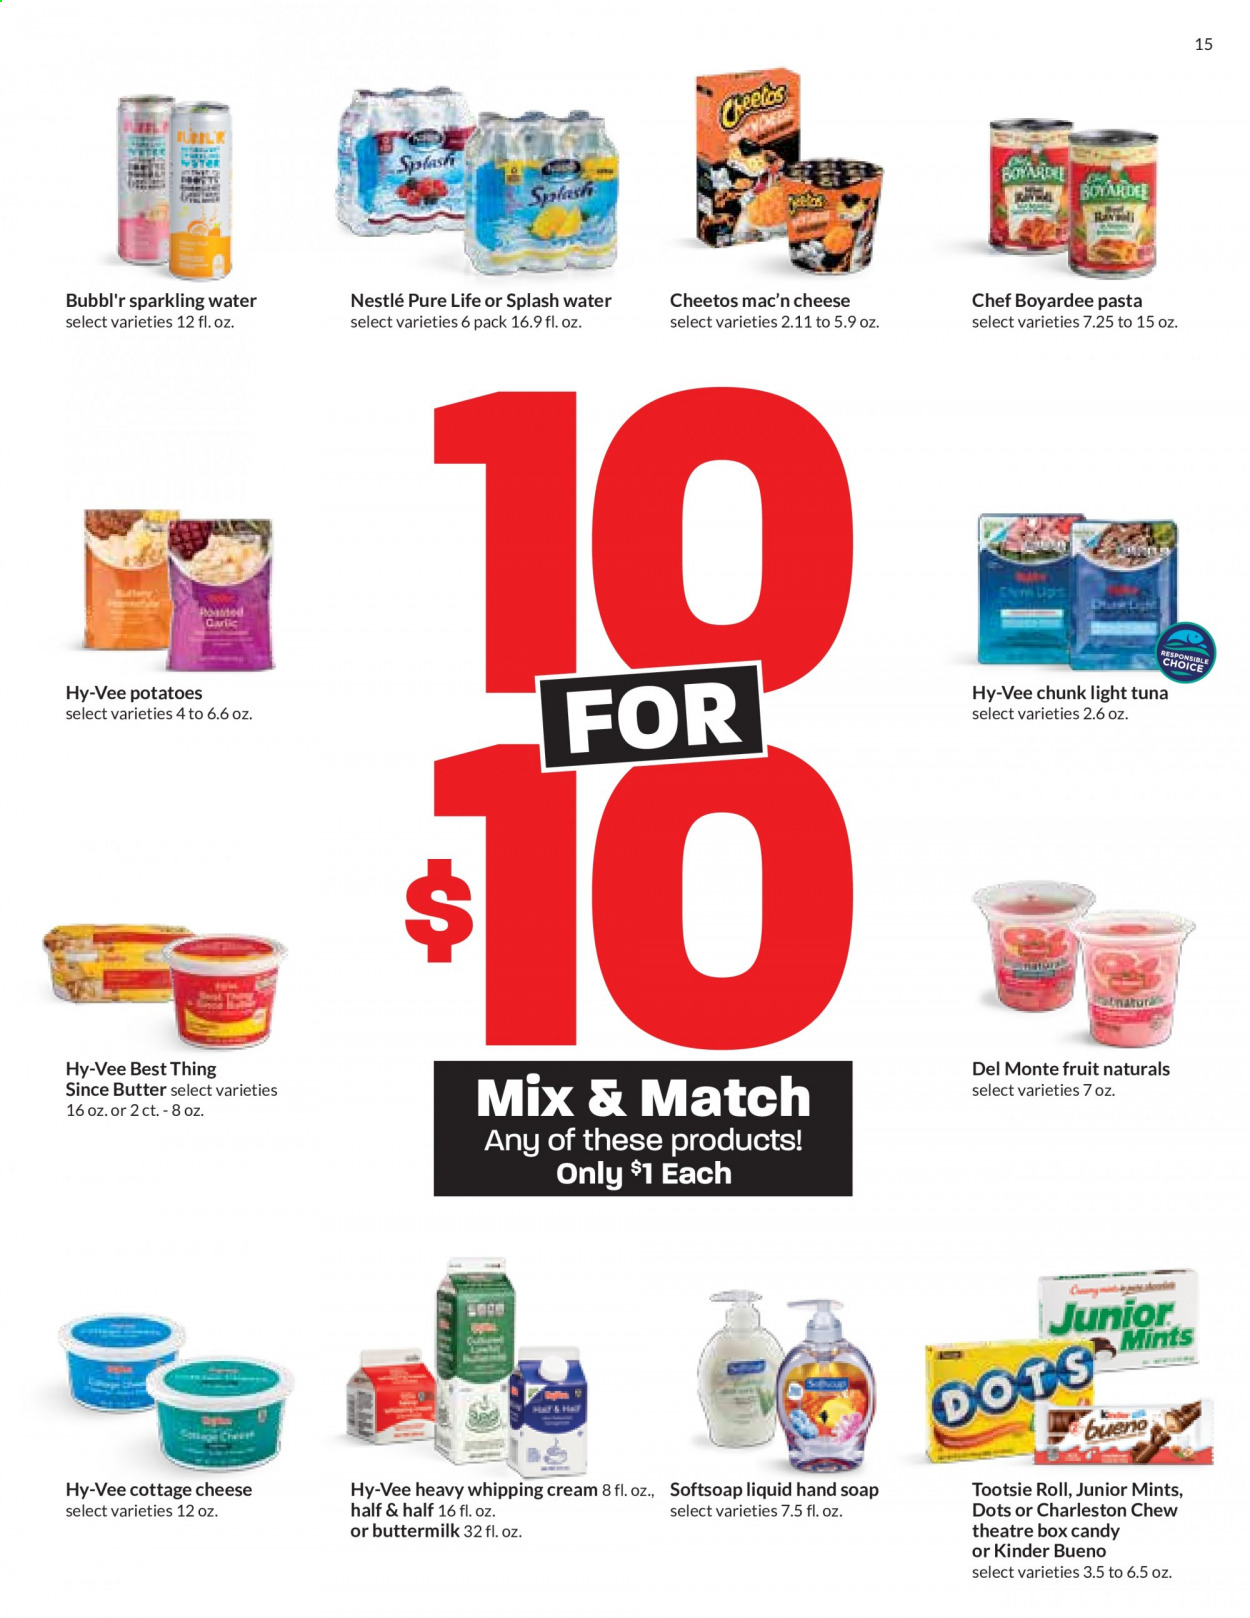 thumbnail - Hy-Vee Flyer - 07/07/2021 - 07/13/2021 - Sales products - potatoes, tuna, pasta, cottage cheese, cheese, buttermilk, whipping cream, Nestlé, Kinder Bueno, Cheetos, light tuna, Chef Boyardee, sparkling water, Softsoap, hand soap, soap, hat, Half and half. Page 15.